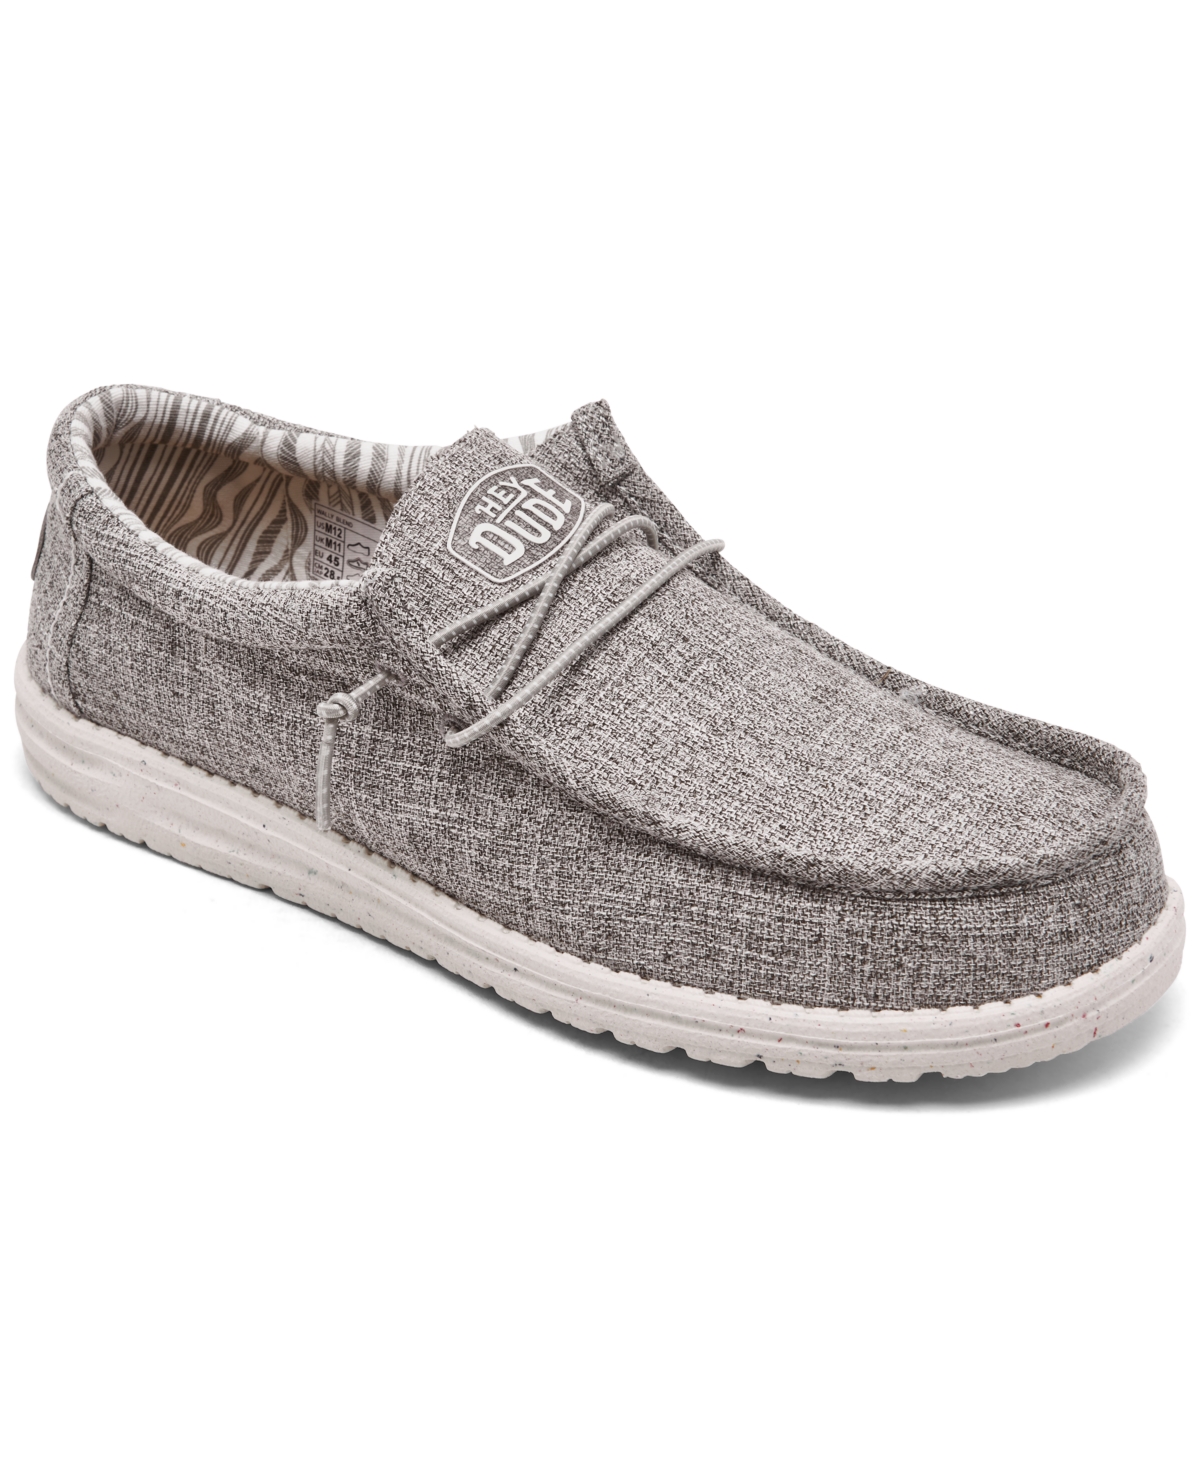 Men's Wally Linen Casual Moccasin Sneakers from Finish Line - Iron